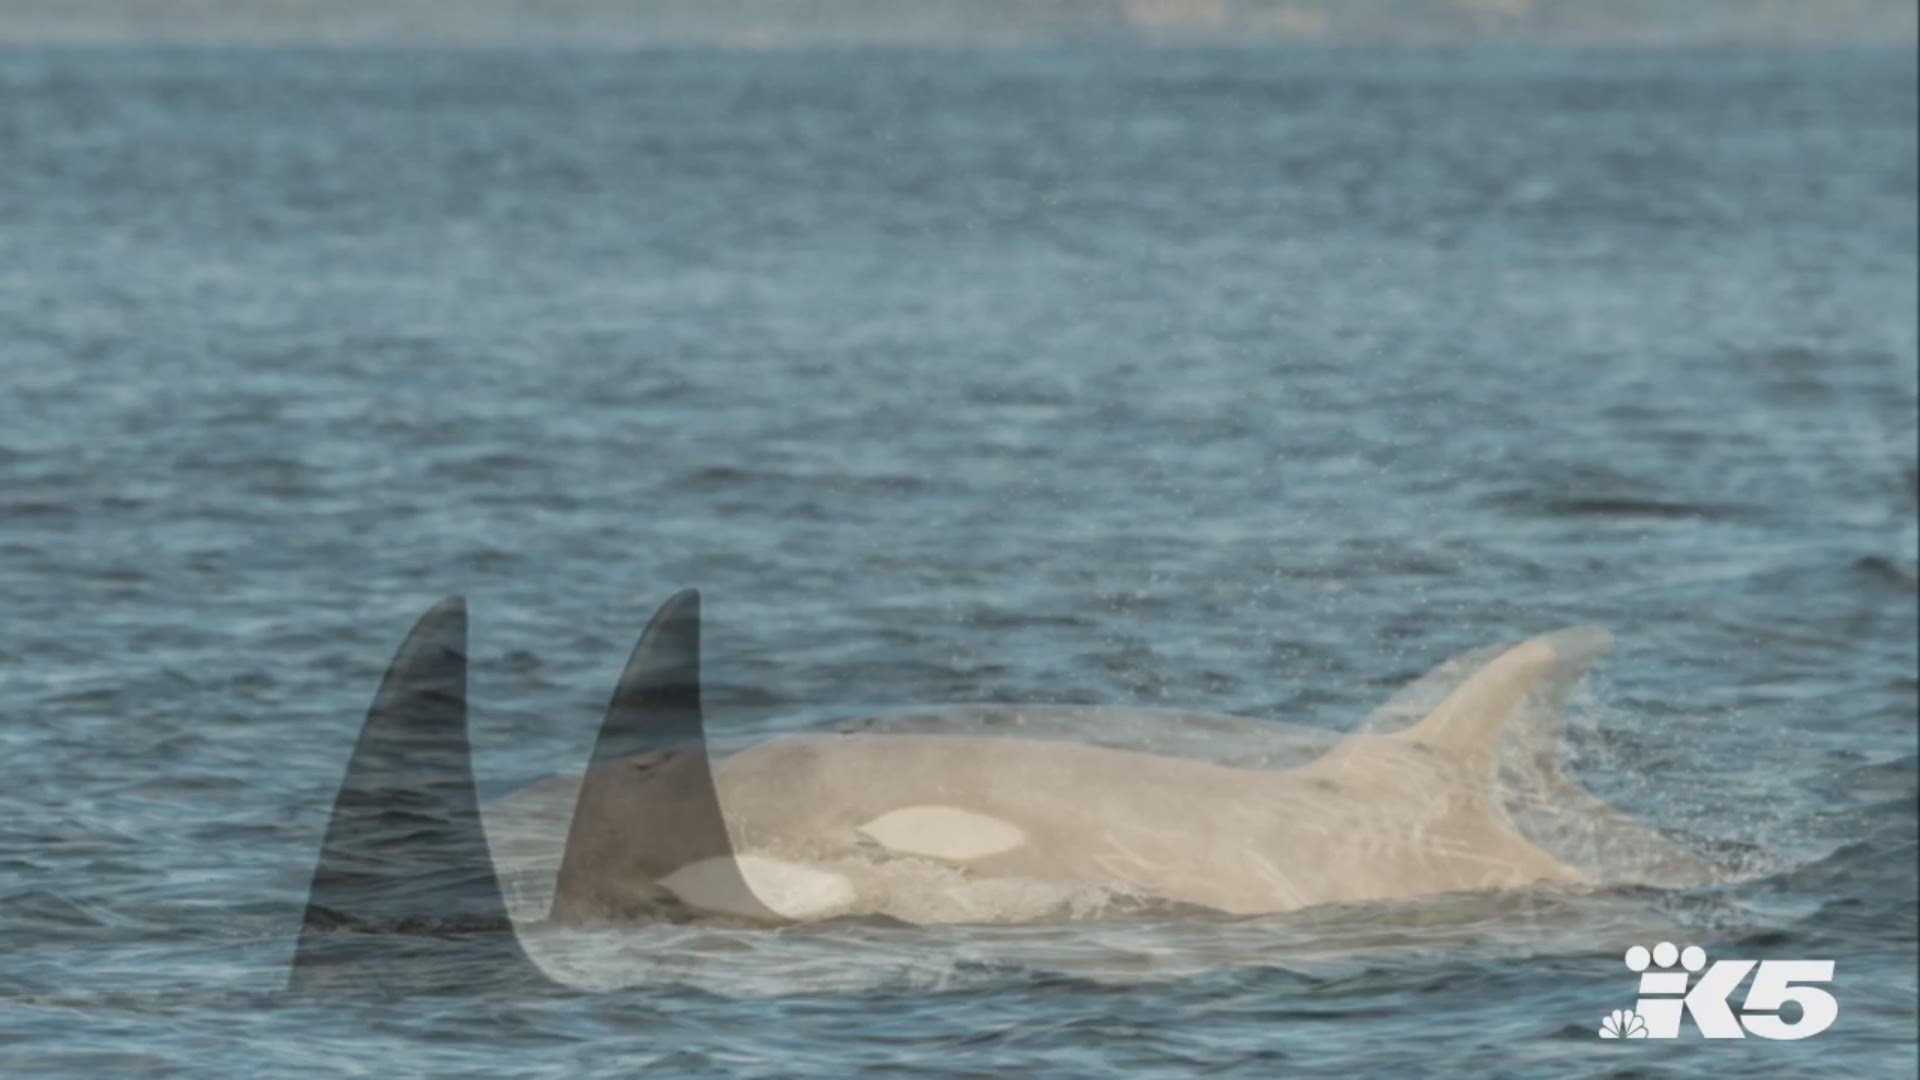 Nearly 40 transient killer whales and about 20 Southern Resident orcas were spotted in Washington waters this weekend. Credit: Jeff Friedman, Maya's Legacy